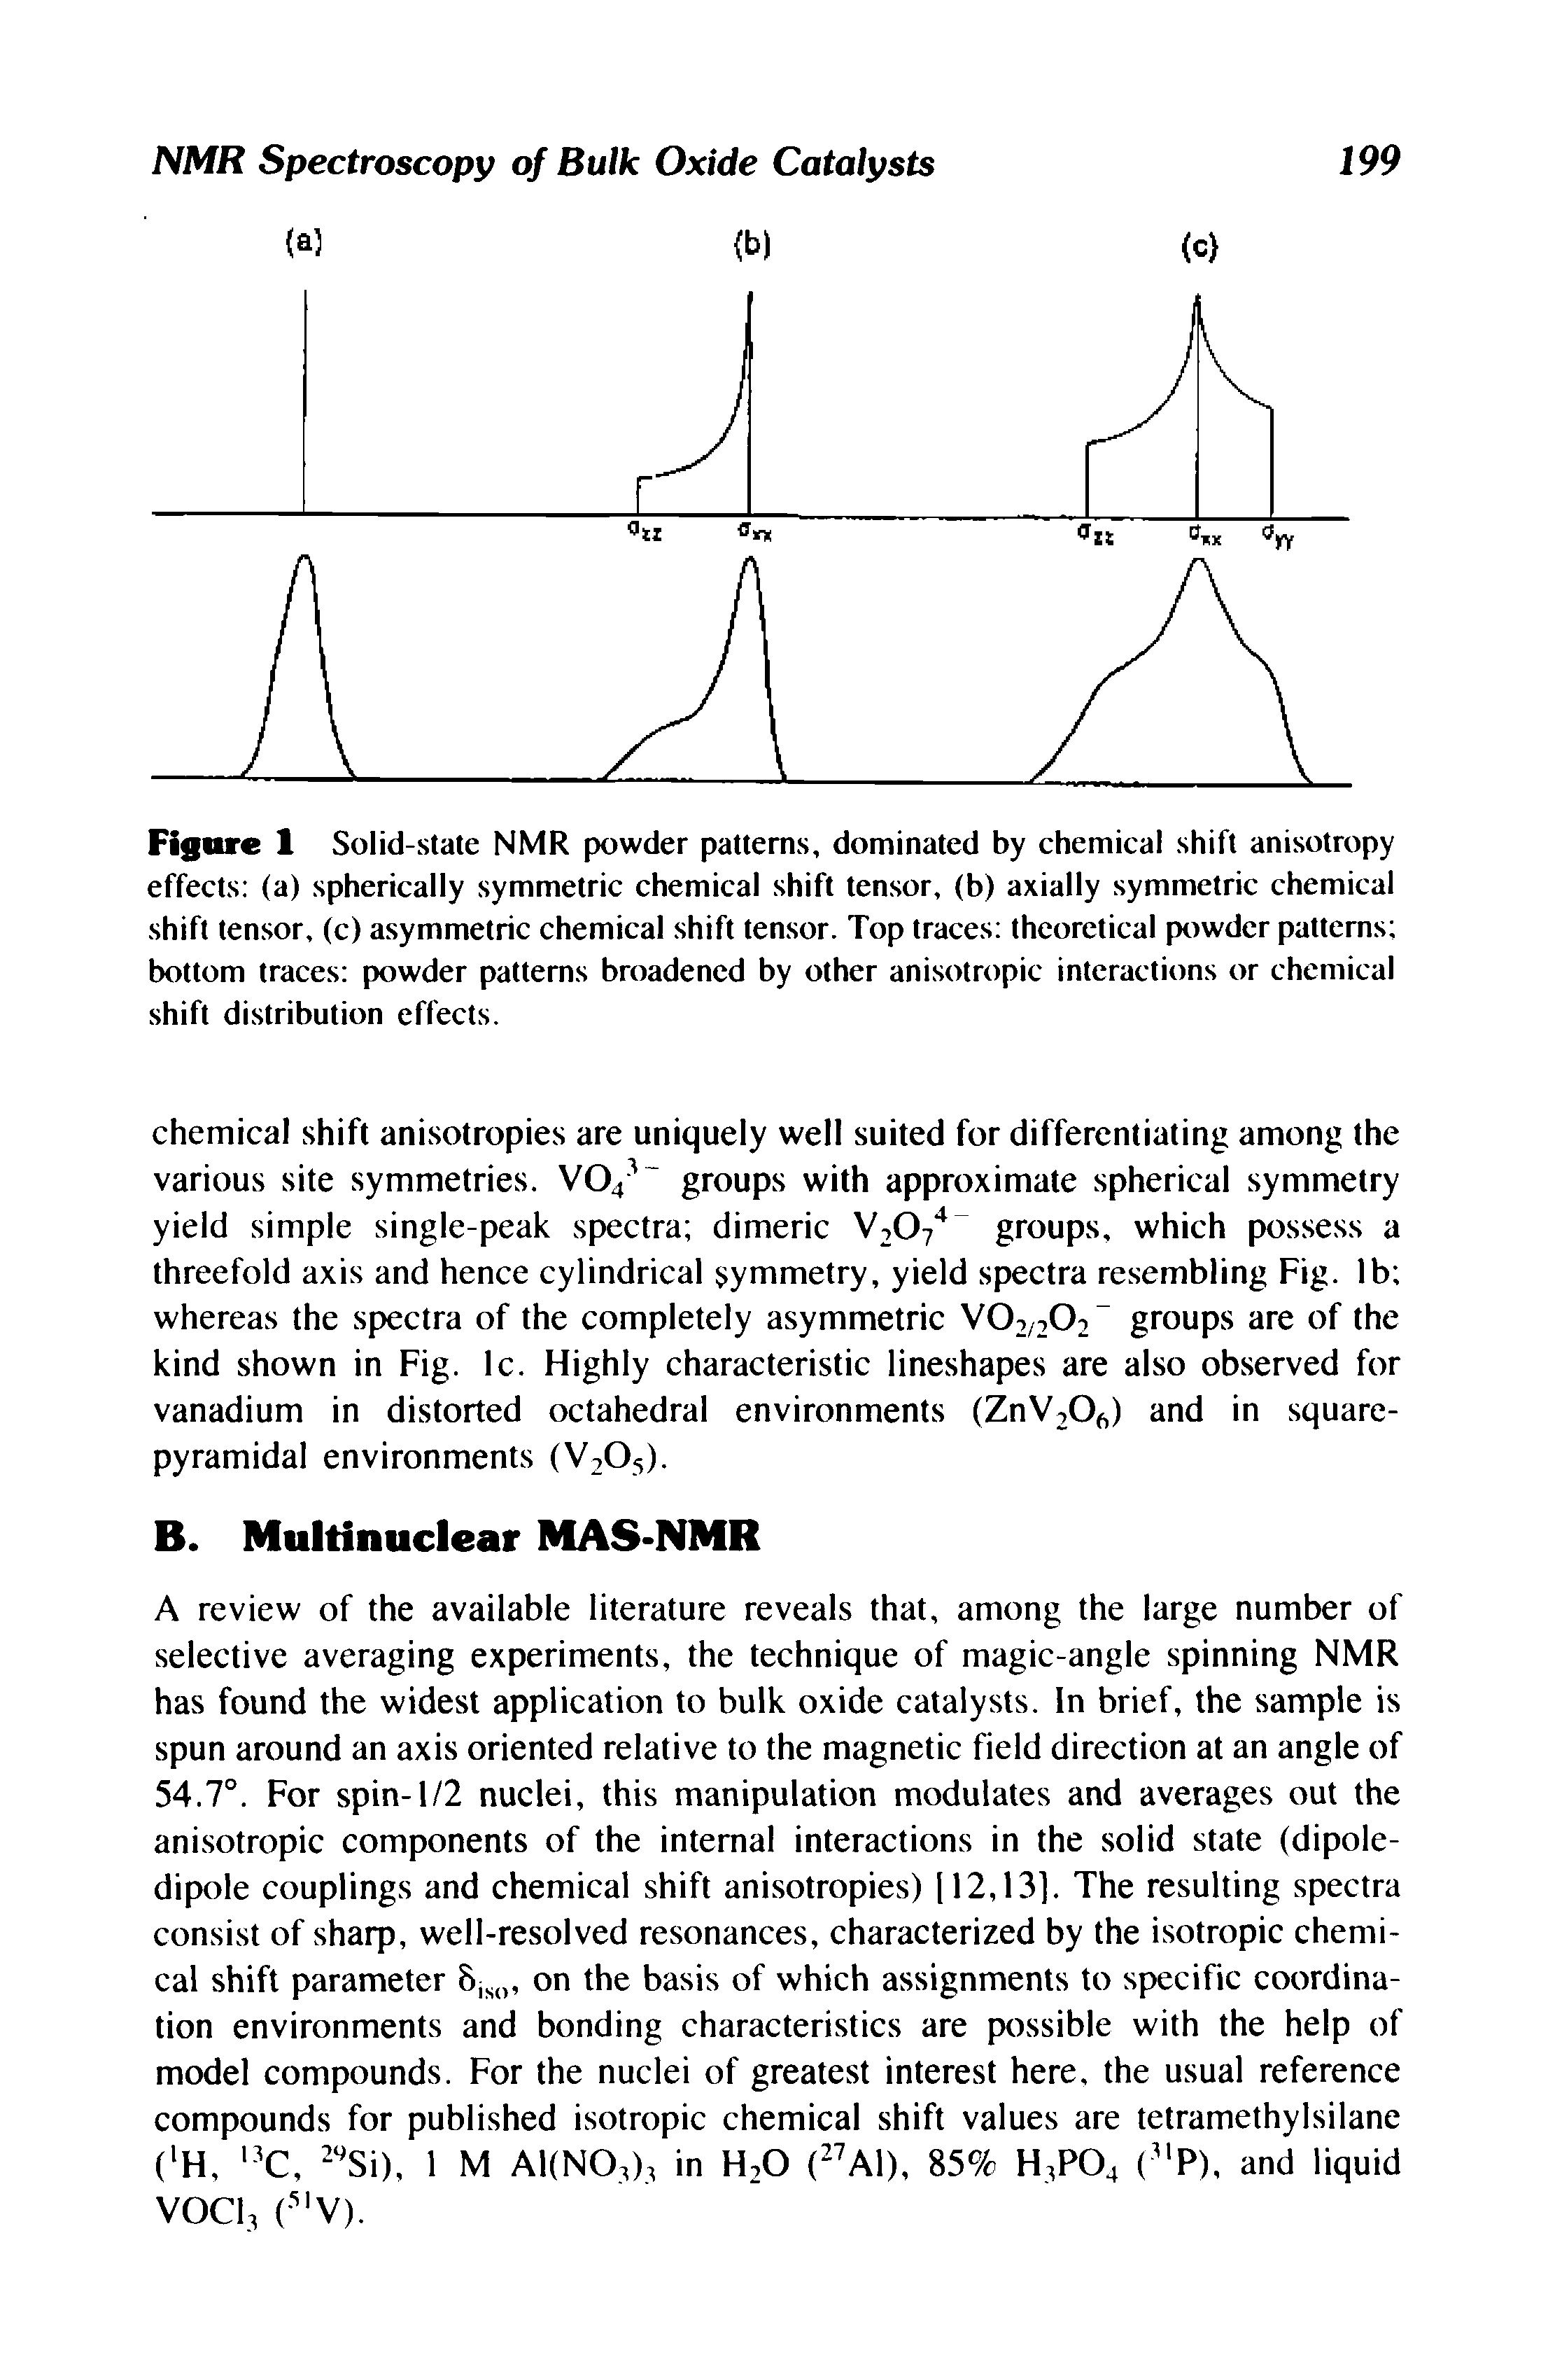 Figure 1 Solid-state NMR powder patterns, dominated by chemical shift anisotropy effects (a) spherically symmetric chemical shift tensor, (b) axially symmetric chemical shift tensor, (c) asymmetric chemical shift tensor. Top traces theoretical powder patterns bottom traces powder patterns broadened by other anisotropic interactions or chemical shift distribution effects.